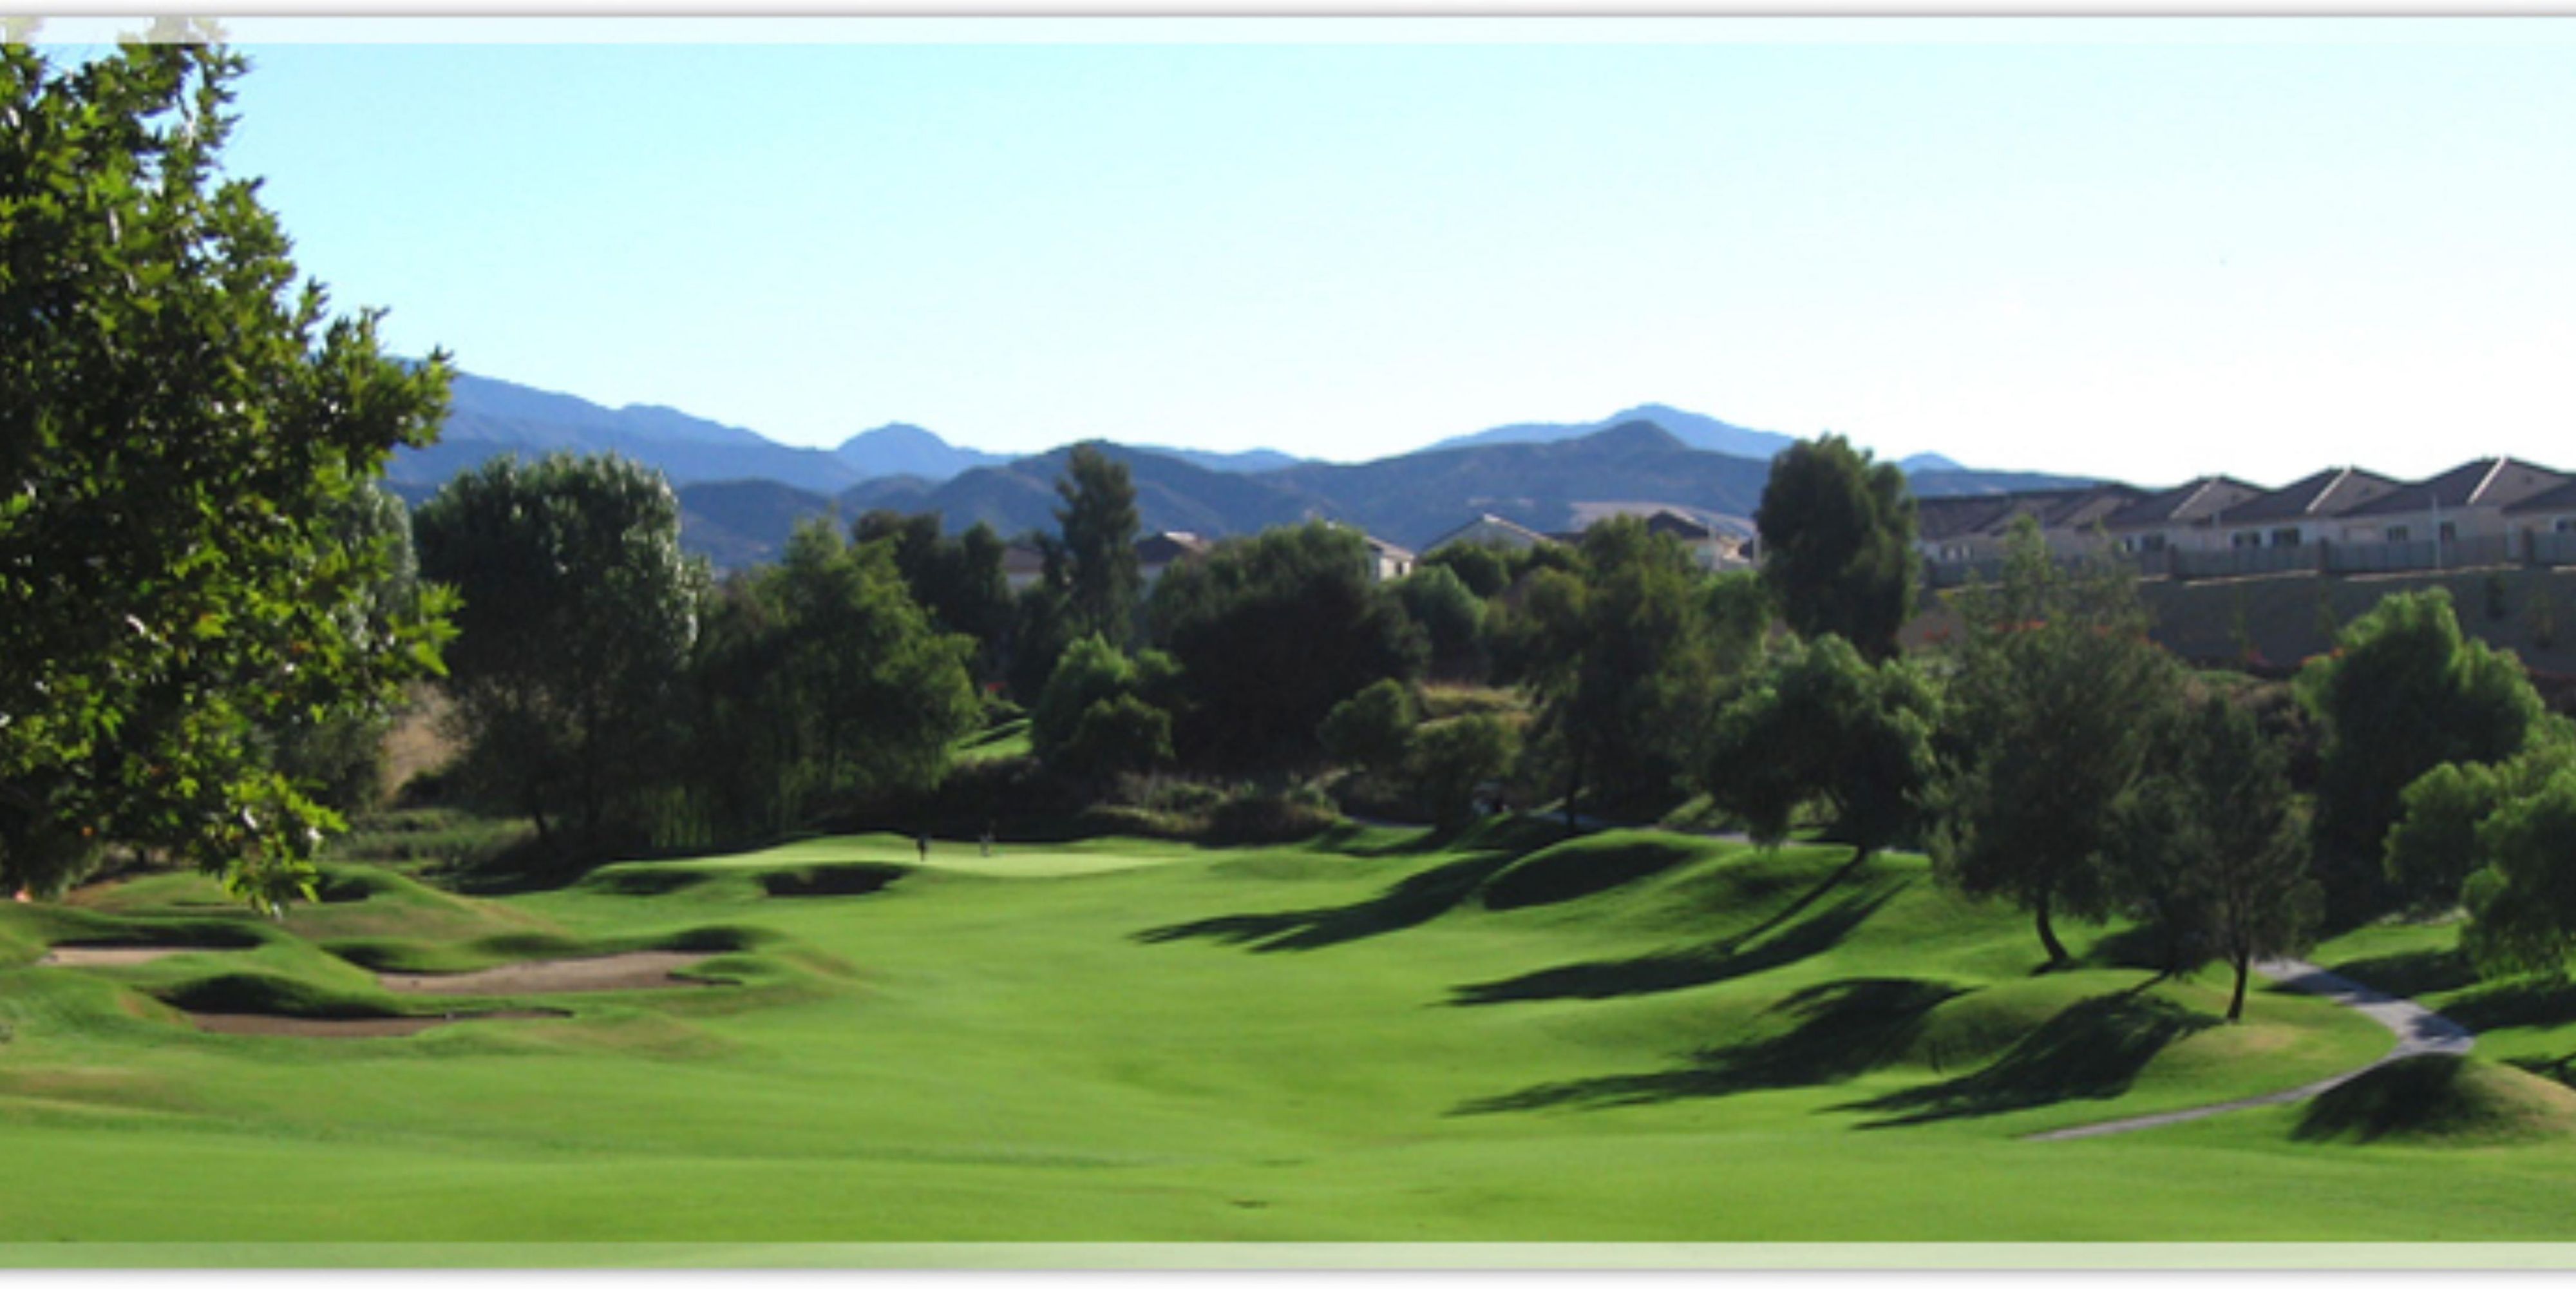 Oak Valley Golf Course with stunning vistas of the San Jacinto mountain range, situated just a few steps away. Zagat rated one of America's top golf courses. If you are thirsty for more Golf we have an additional 36 holes less than a mile away! Come and challenge yourself on 54 holes of some of California's finest!